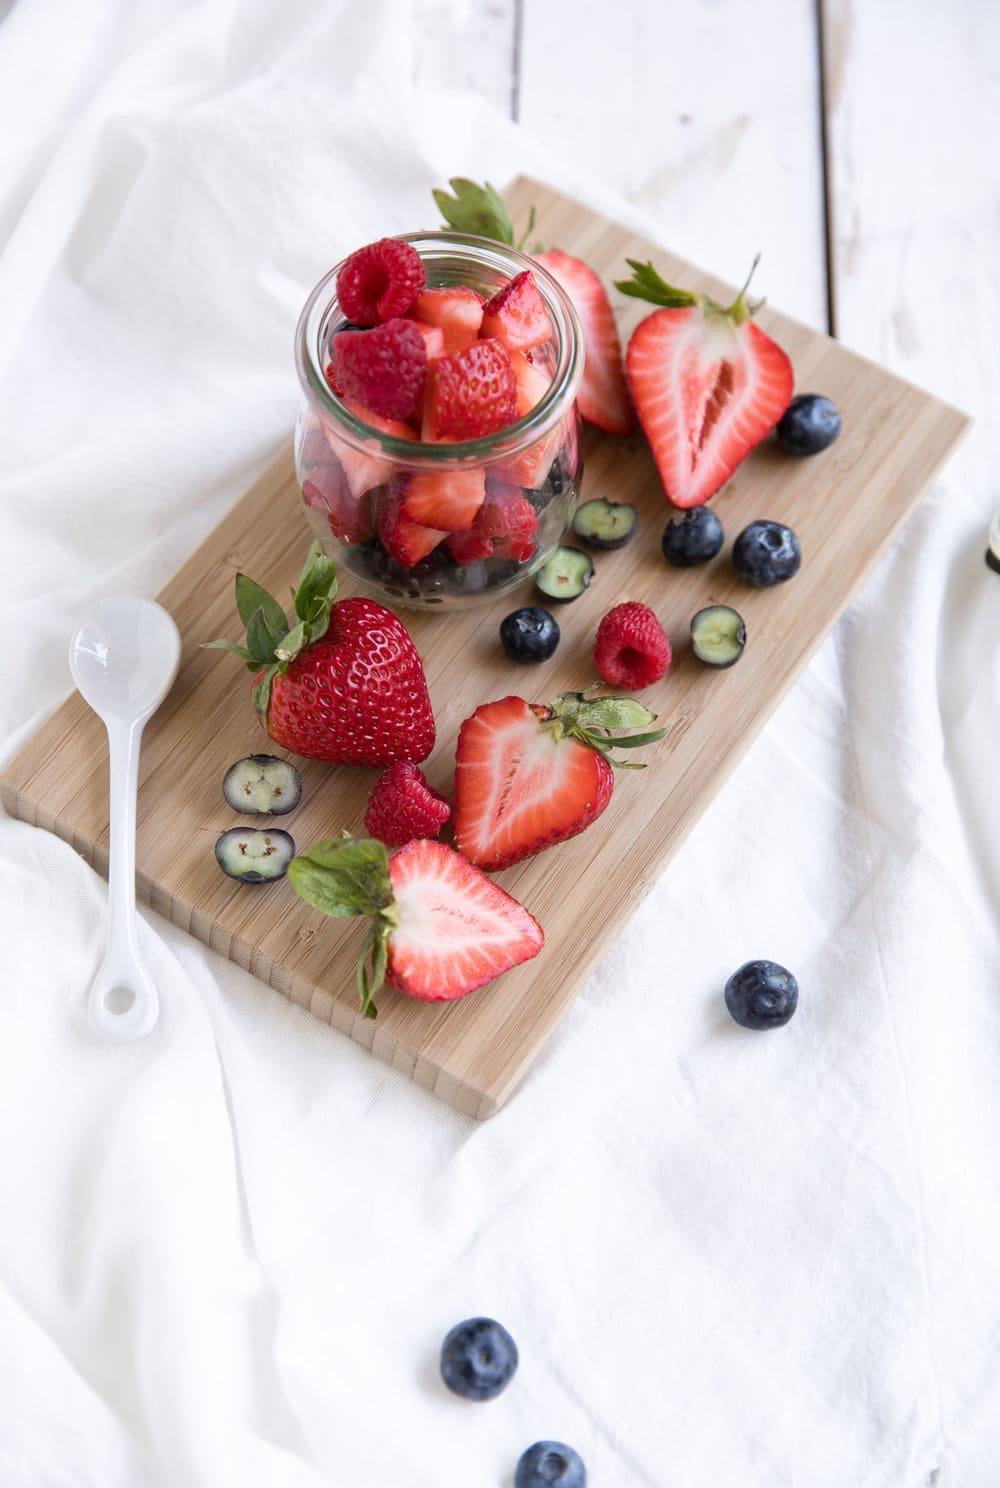 glass filled with sliced strawberries, blueberries, and raspberries